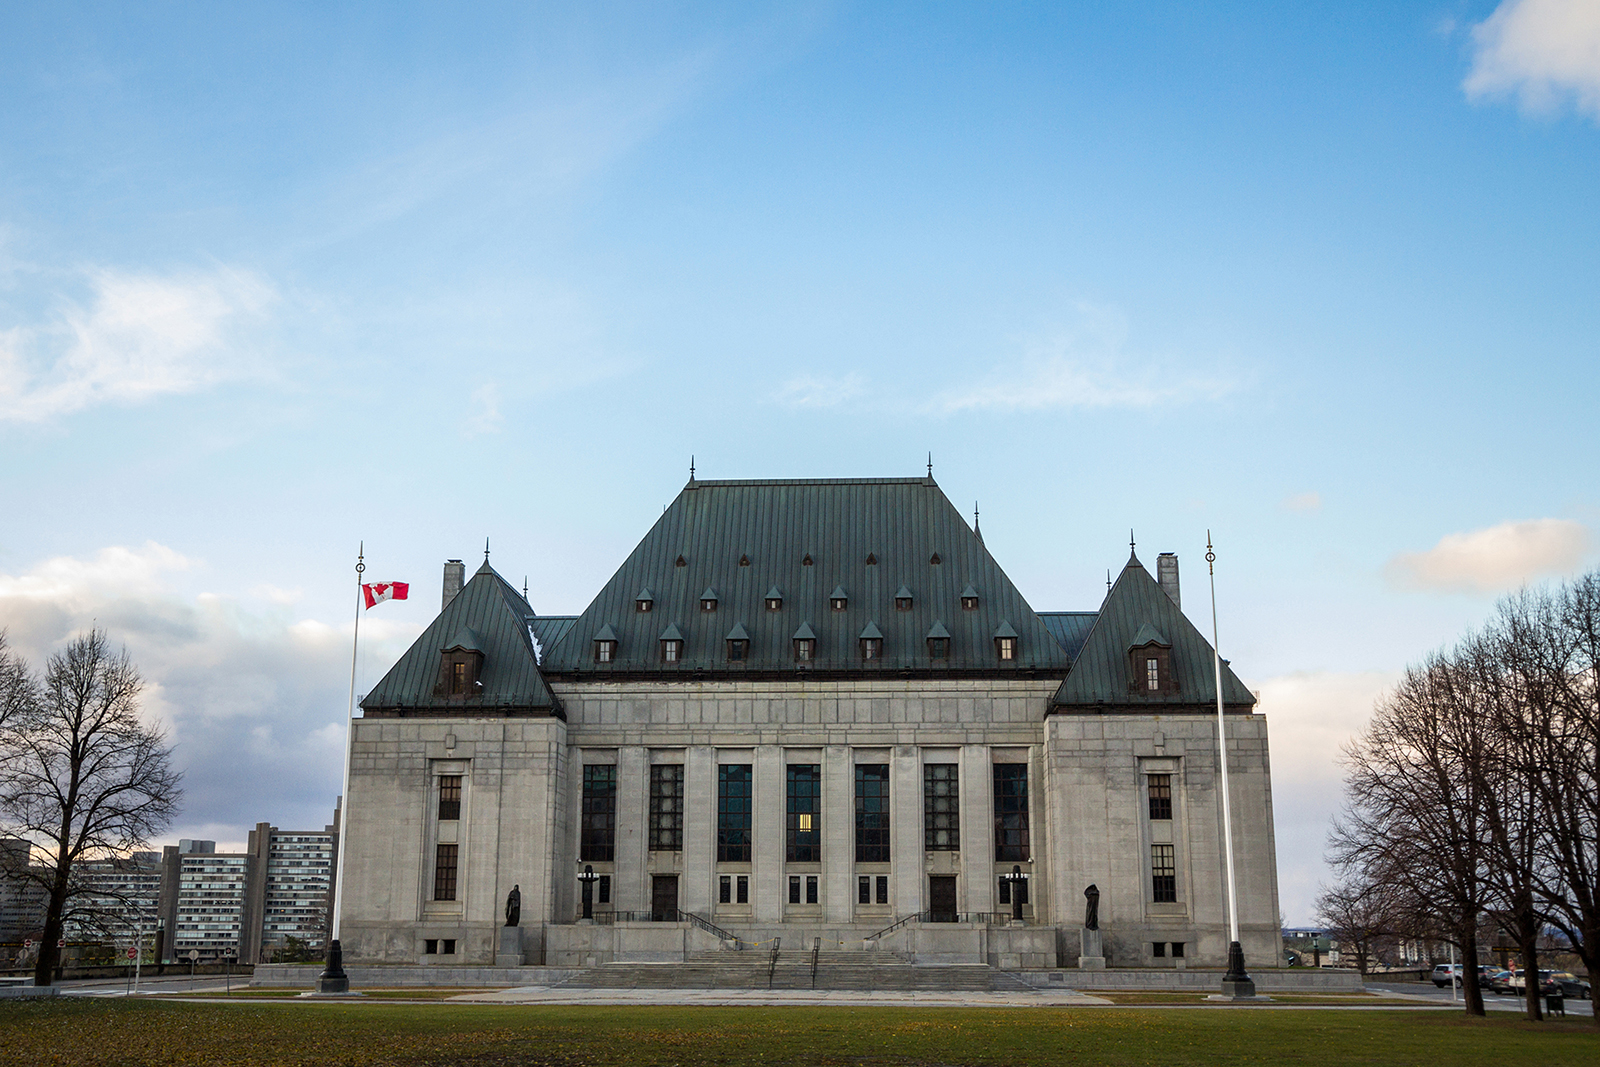 picture of the the entrance of the Supreme Court of Canada, or Cour Supreme du Canada, in Ottawa. The Supreme Court of Canada is the highest court of Canada, the final court of appeals in the Canadian justice system. Its decisions are the ultimate expression and application of Canadian law and binding upon all lower courts of Canada